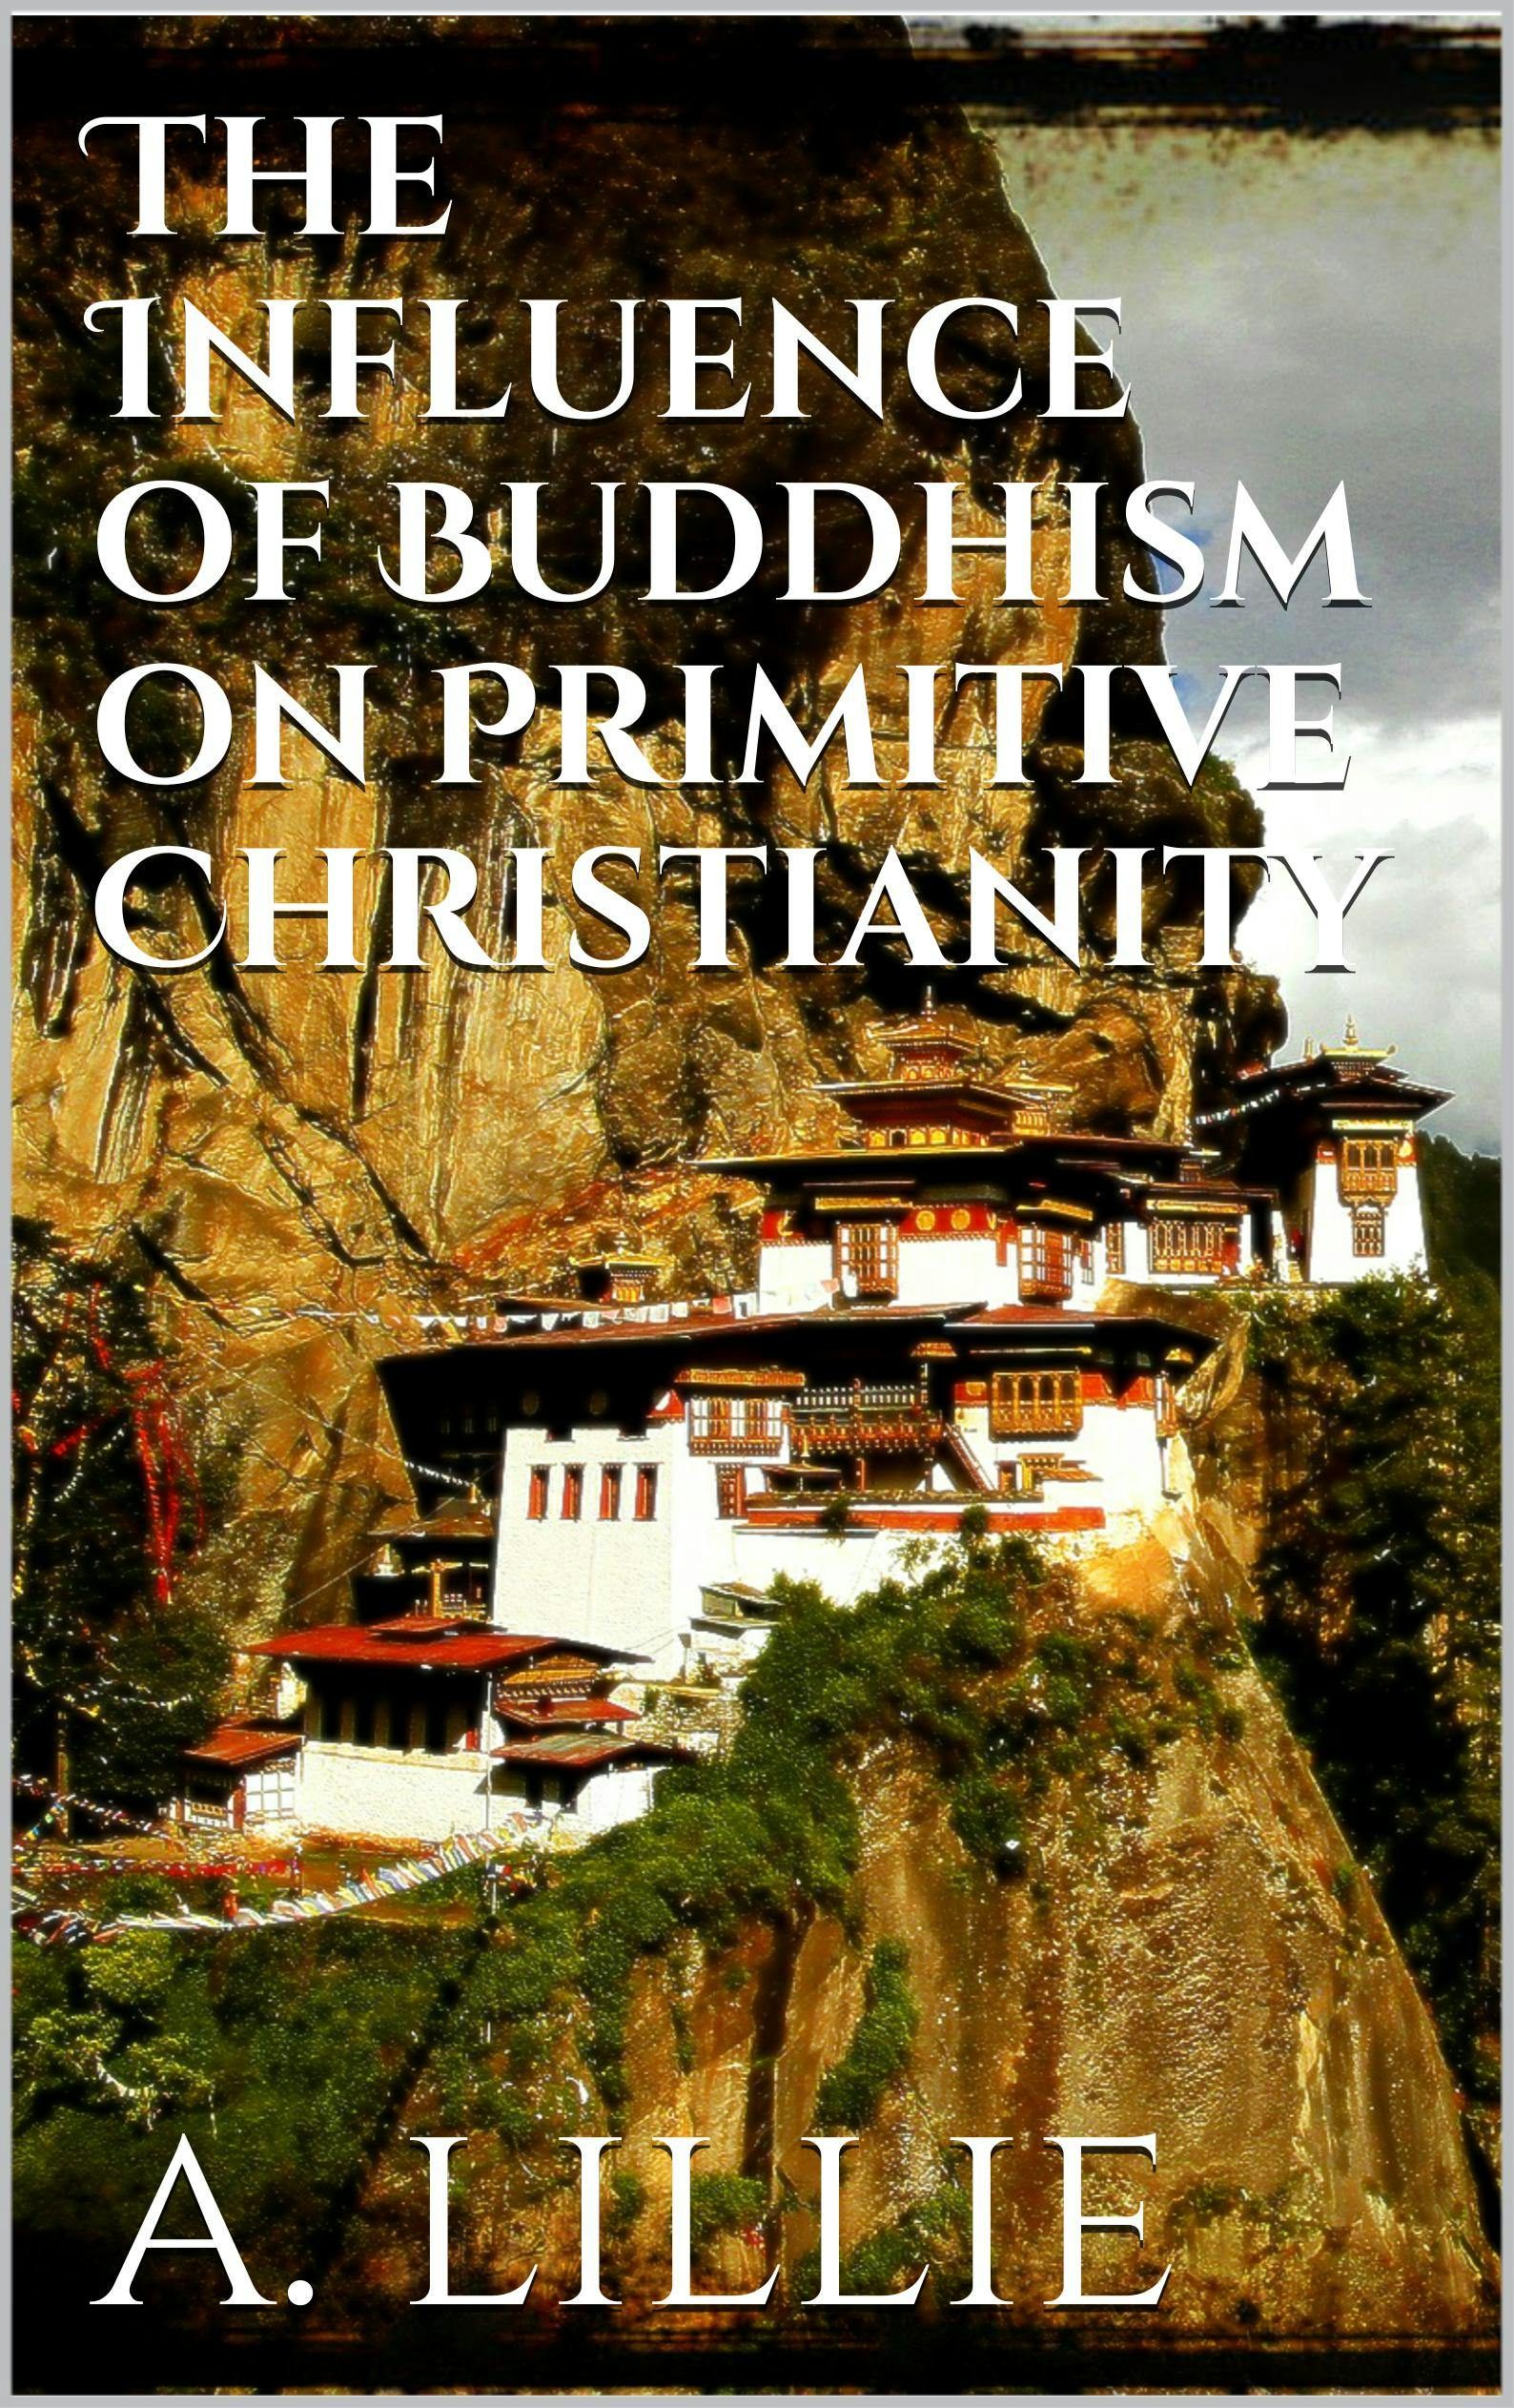 The Influence of Buddhism on Primitive Christianity - Arthur Lillie